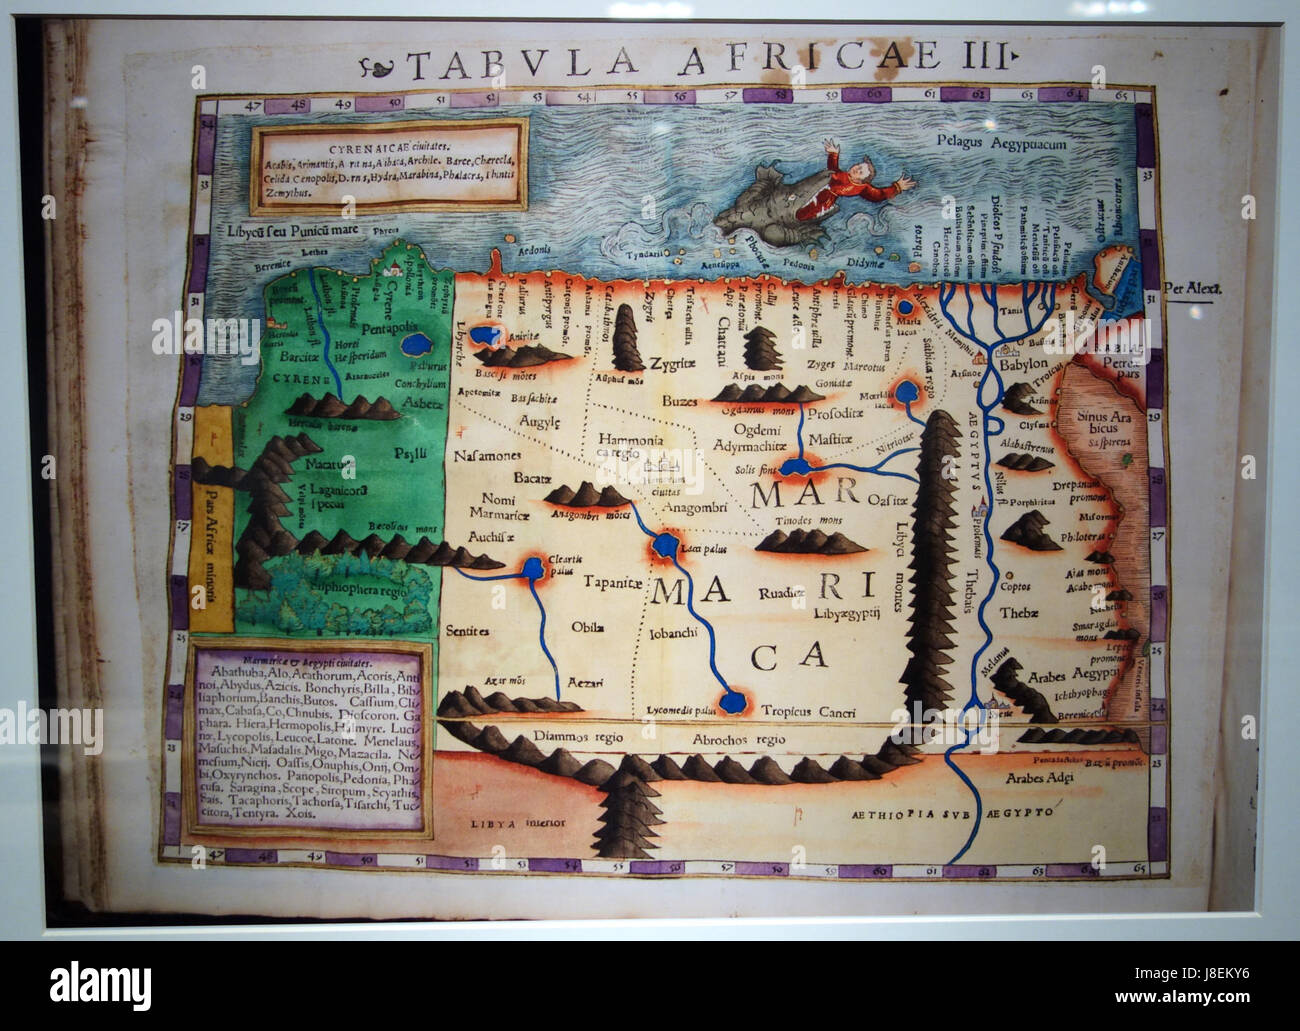 Geographia by Ptolemy, Aphricae Tabula III, 1540 Basel edition   Maps of Africa   Robert C. Williams Paper Museum   DSC00625 Stock Photo